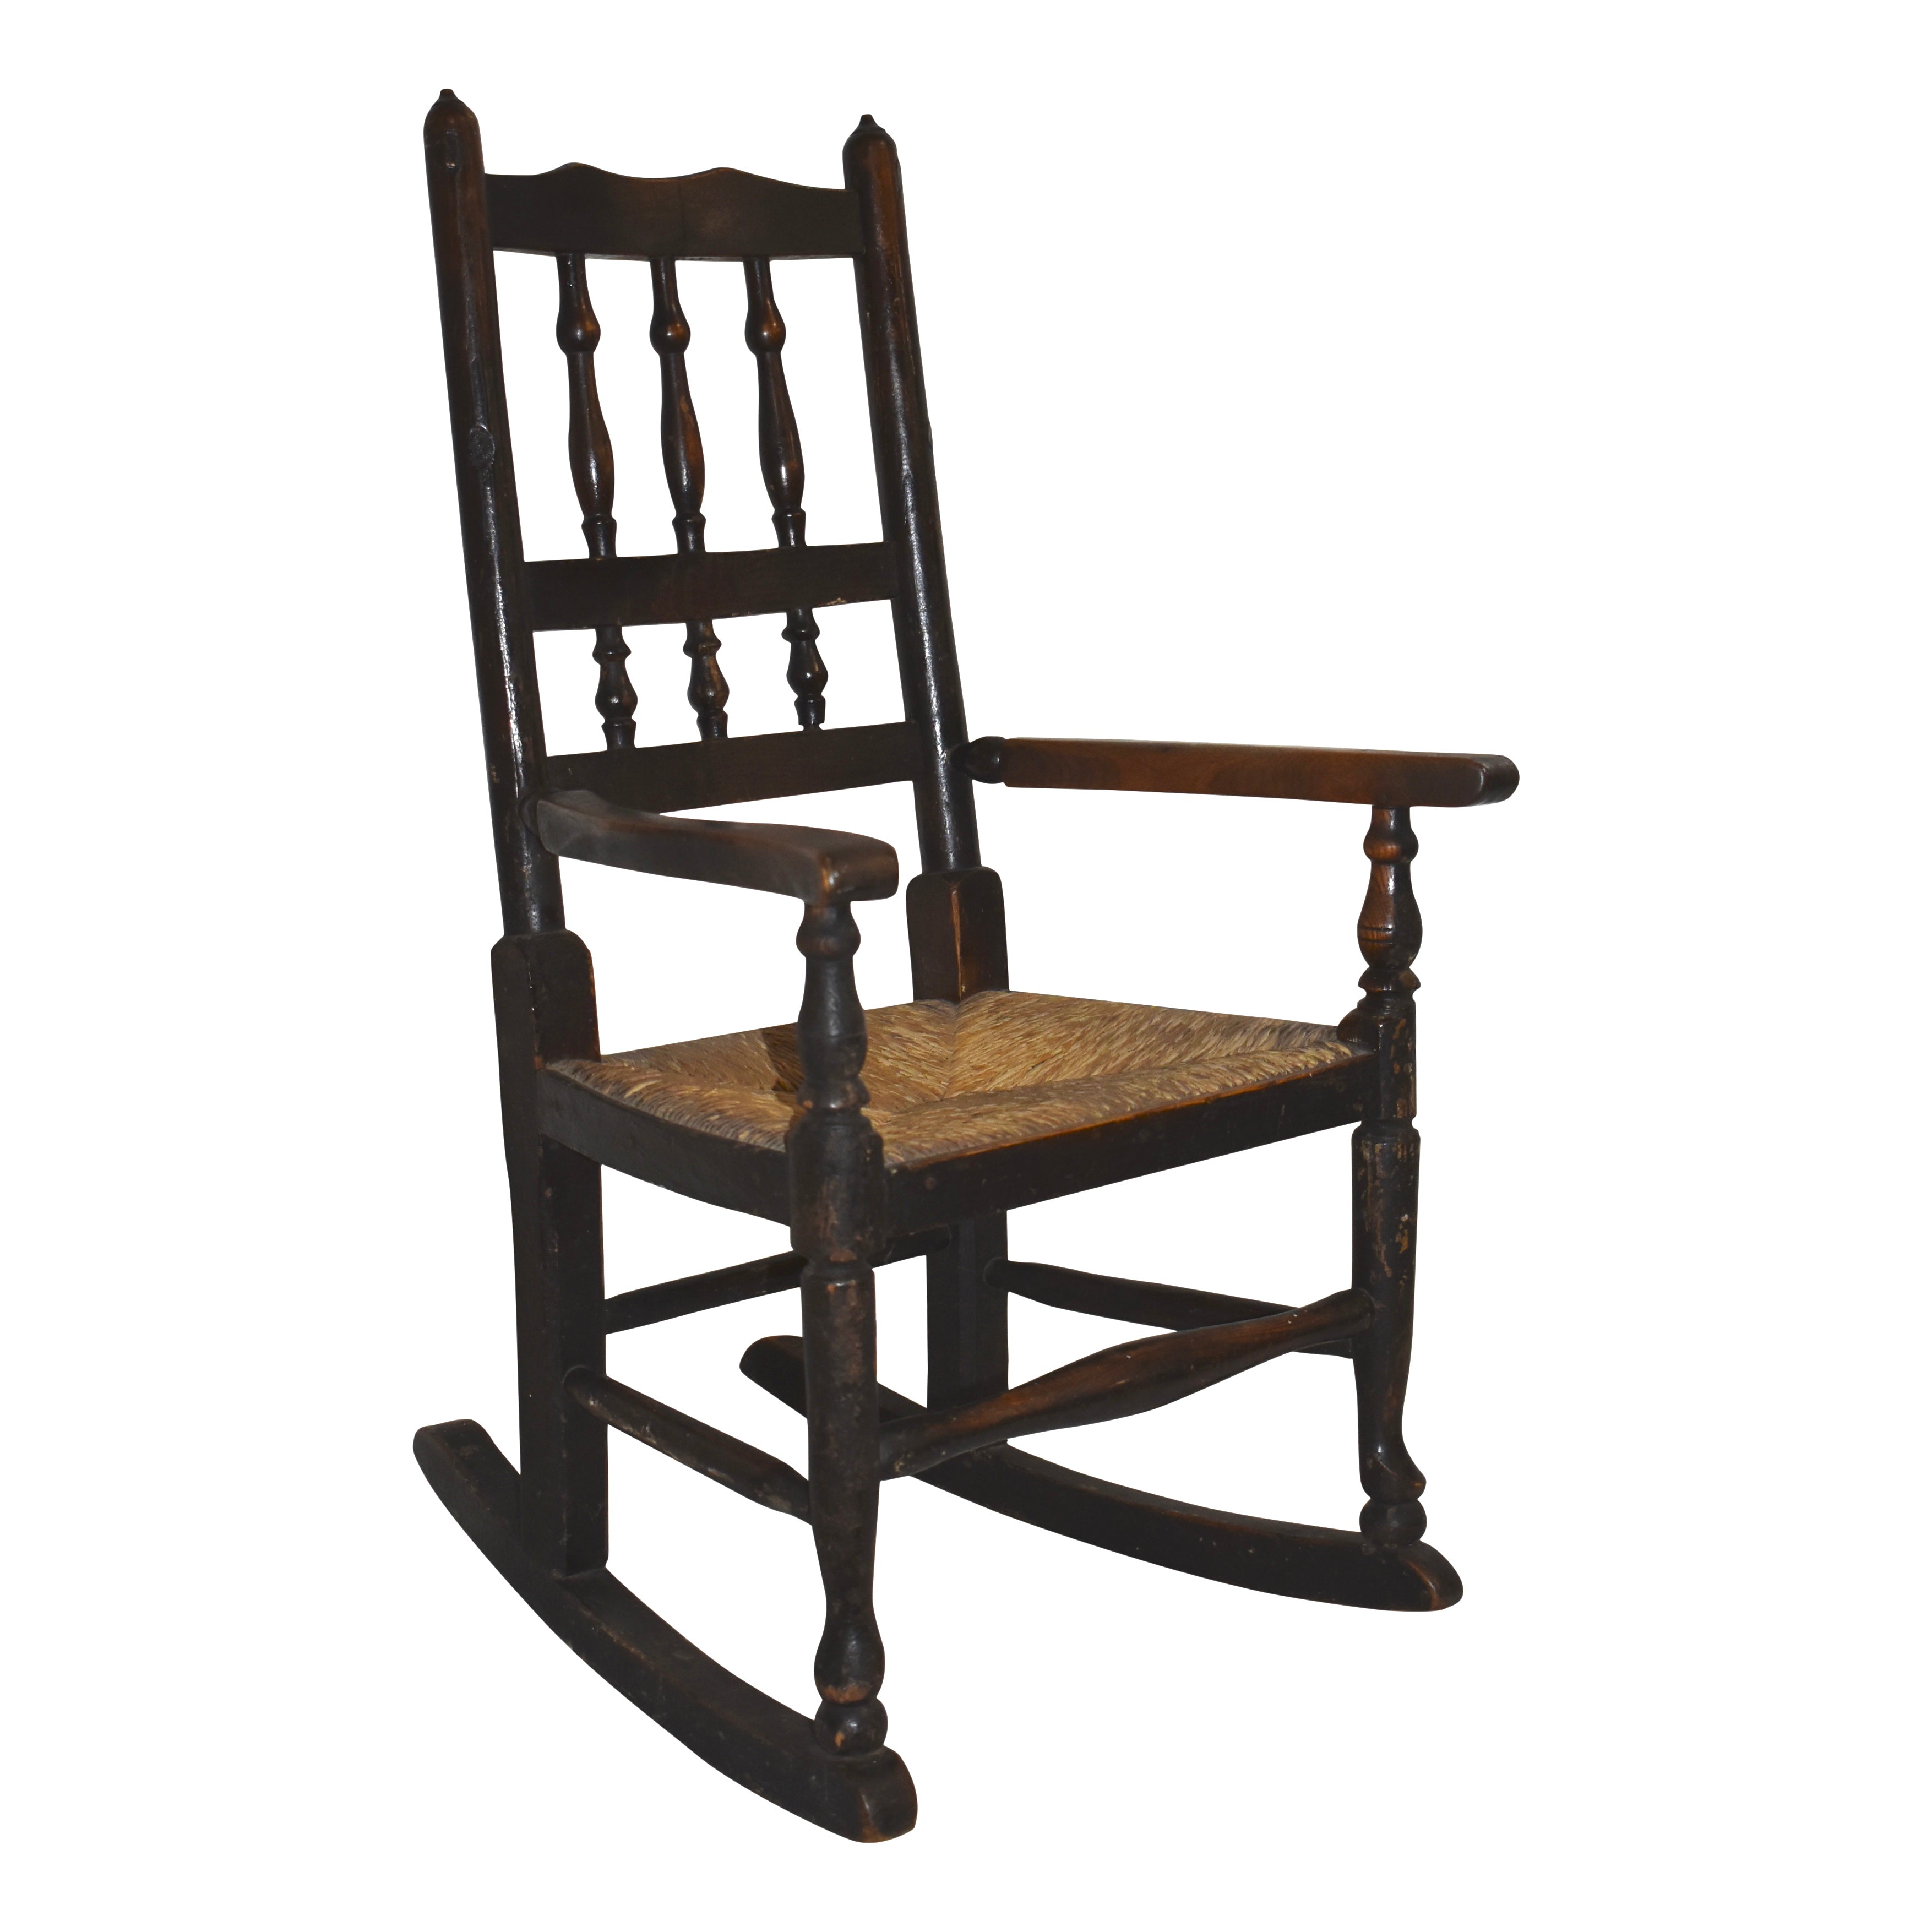 Child's Rocking Chair with Rush Seat